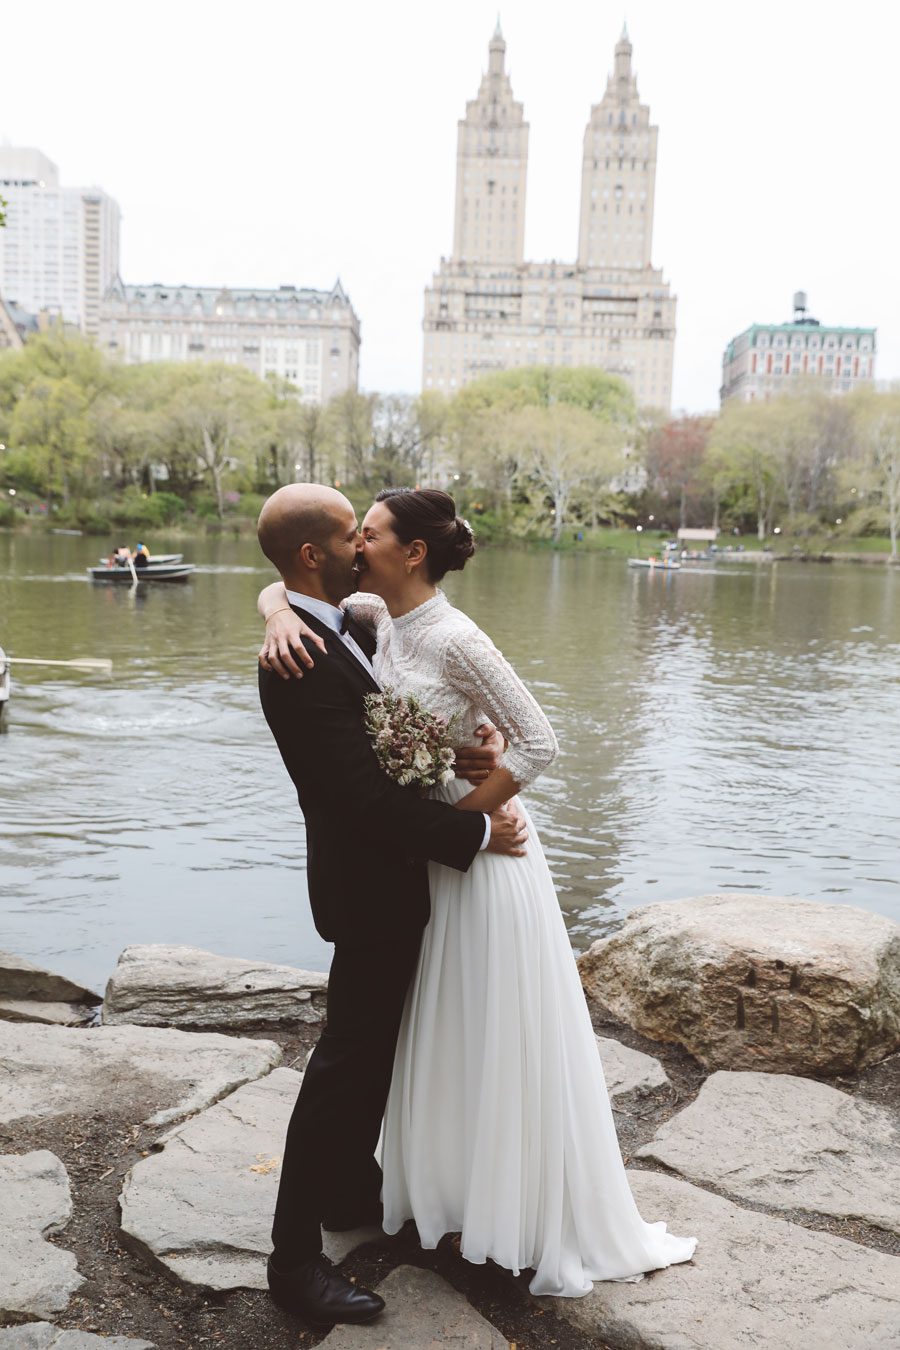 Elope to Central Park